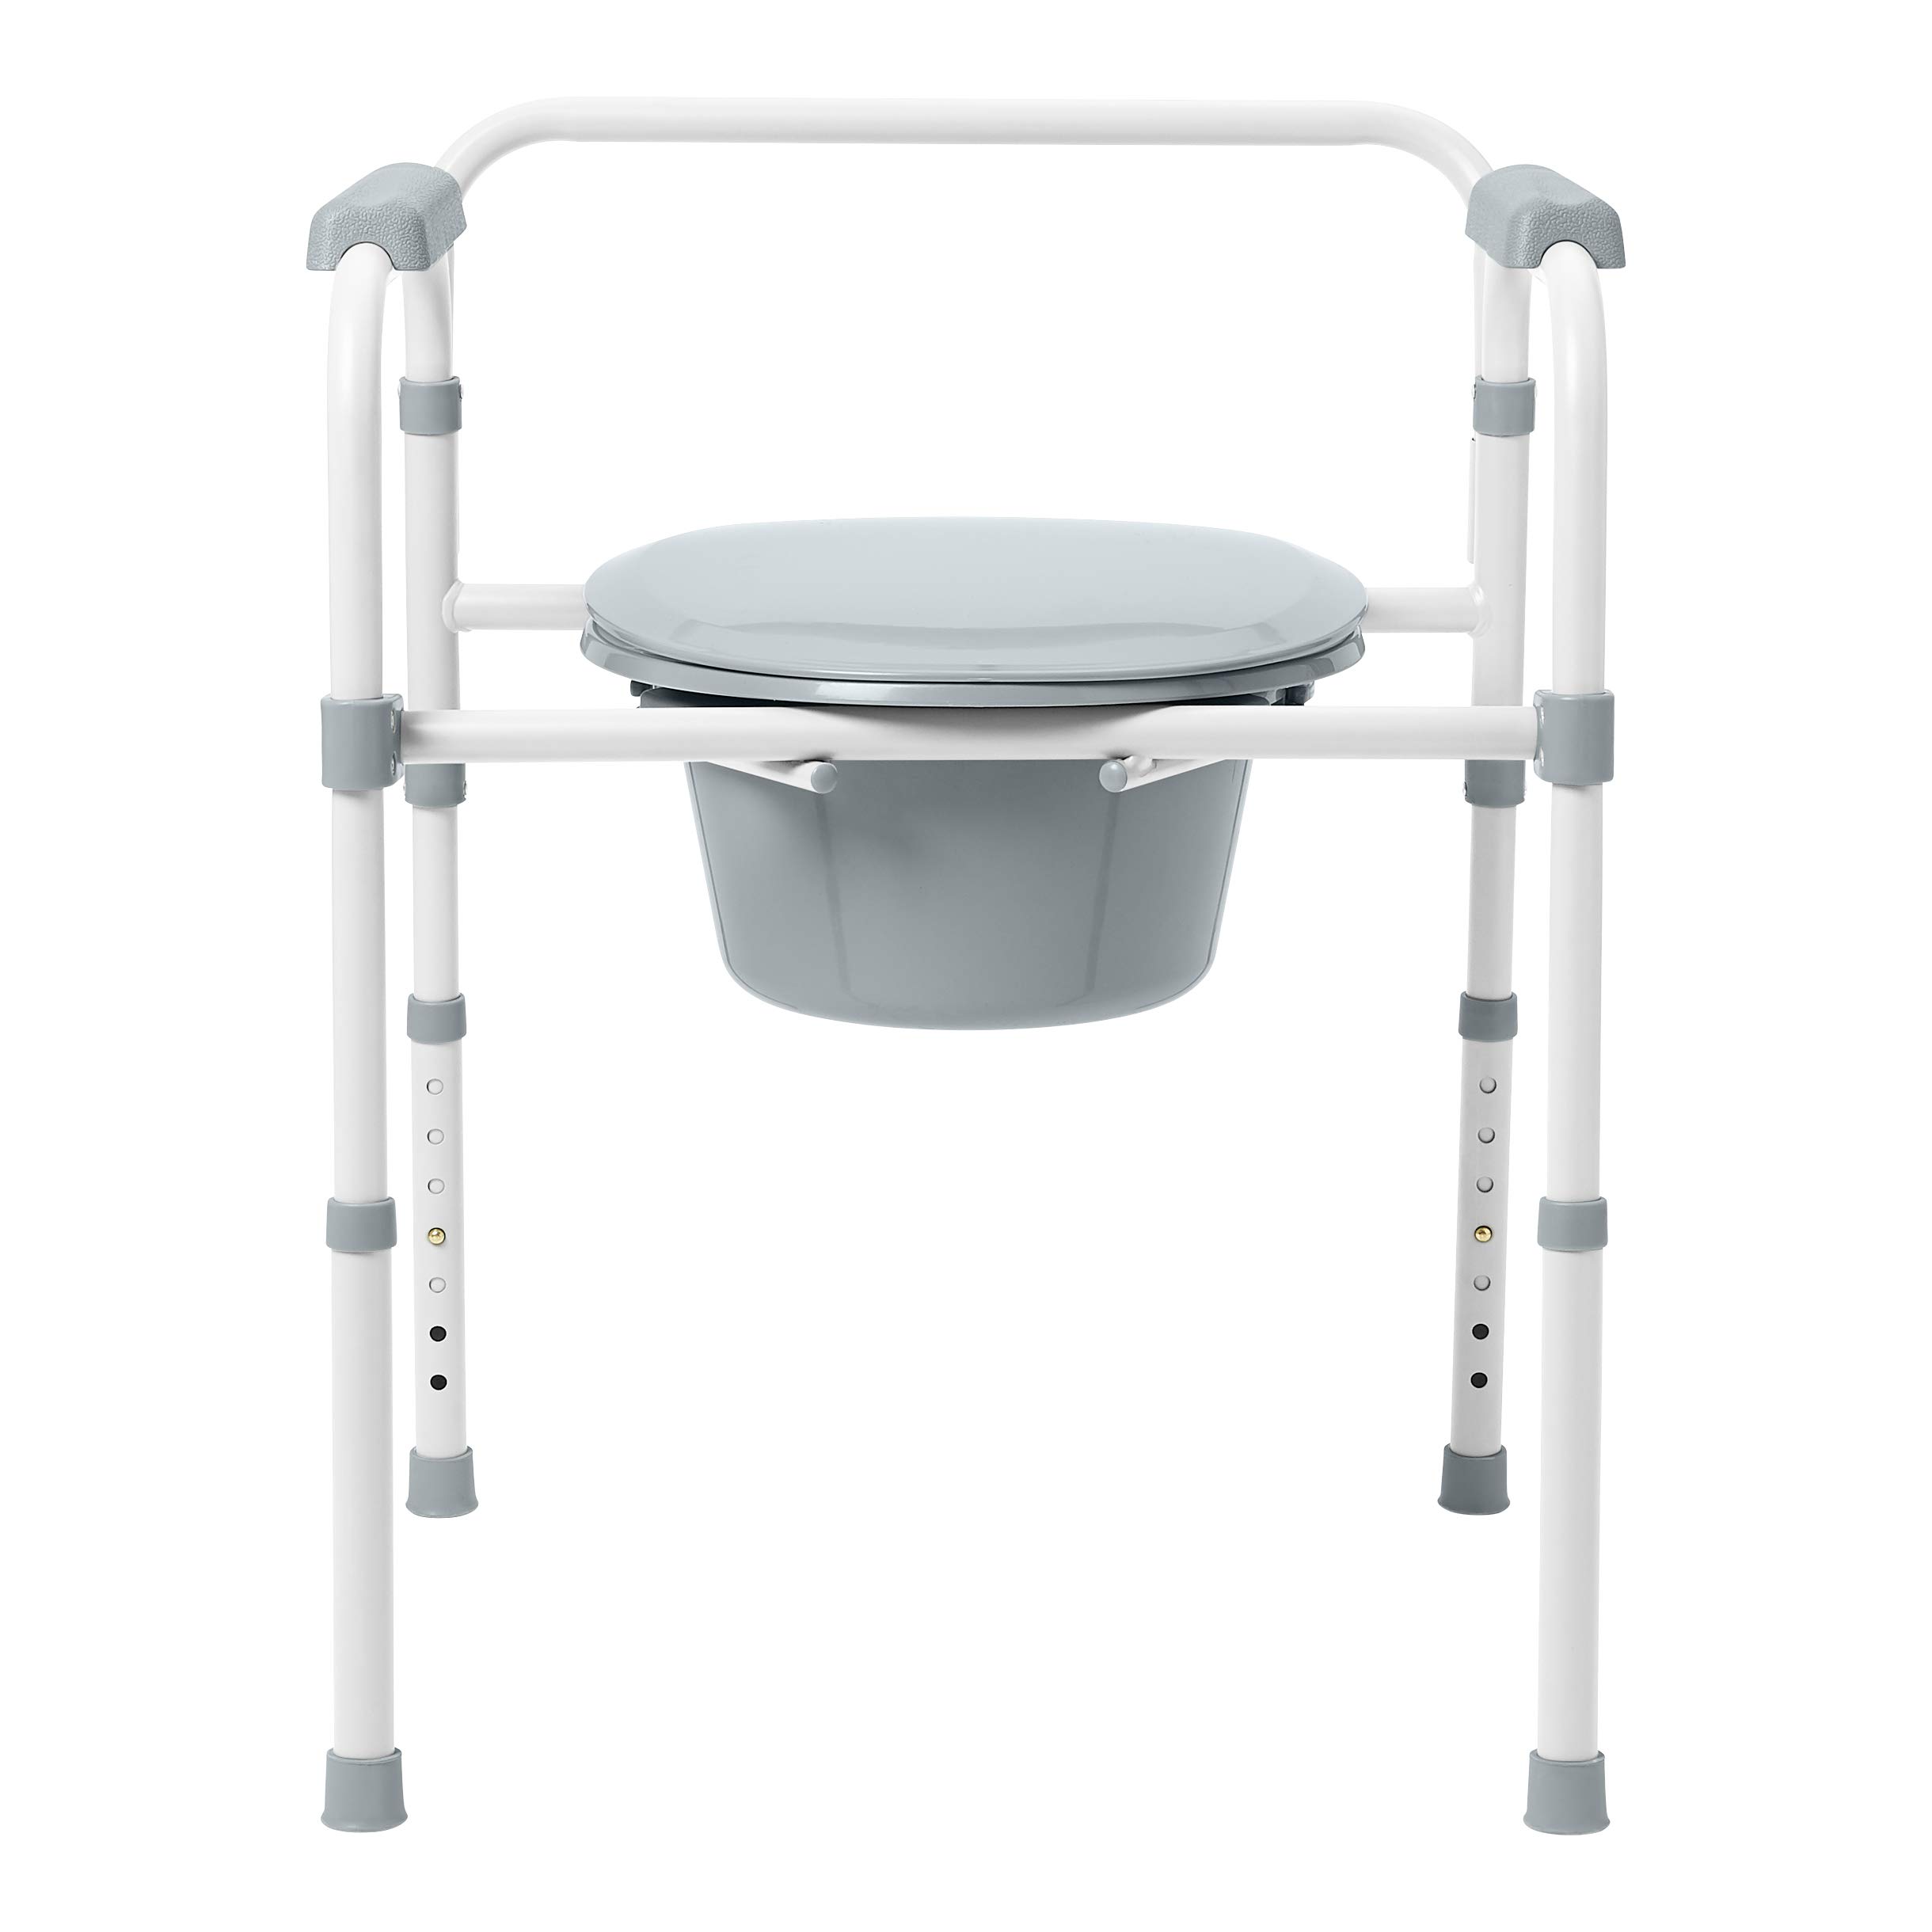 Medline 3-in-1 Steel Bedside Commode, Elongated Seat, Folding Frame, Clip on for Easy Cleaning, 350 lb Capacity